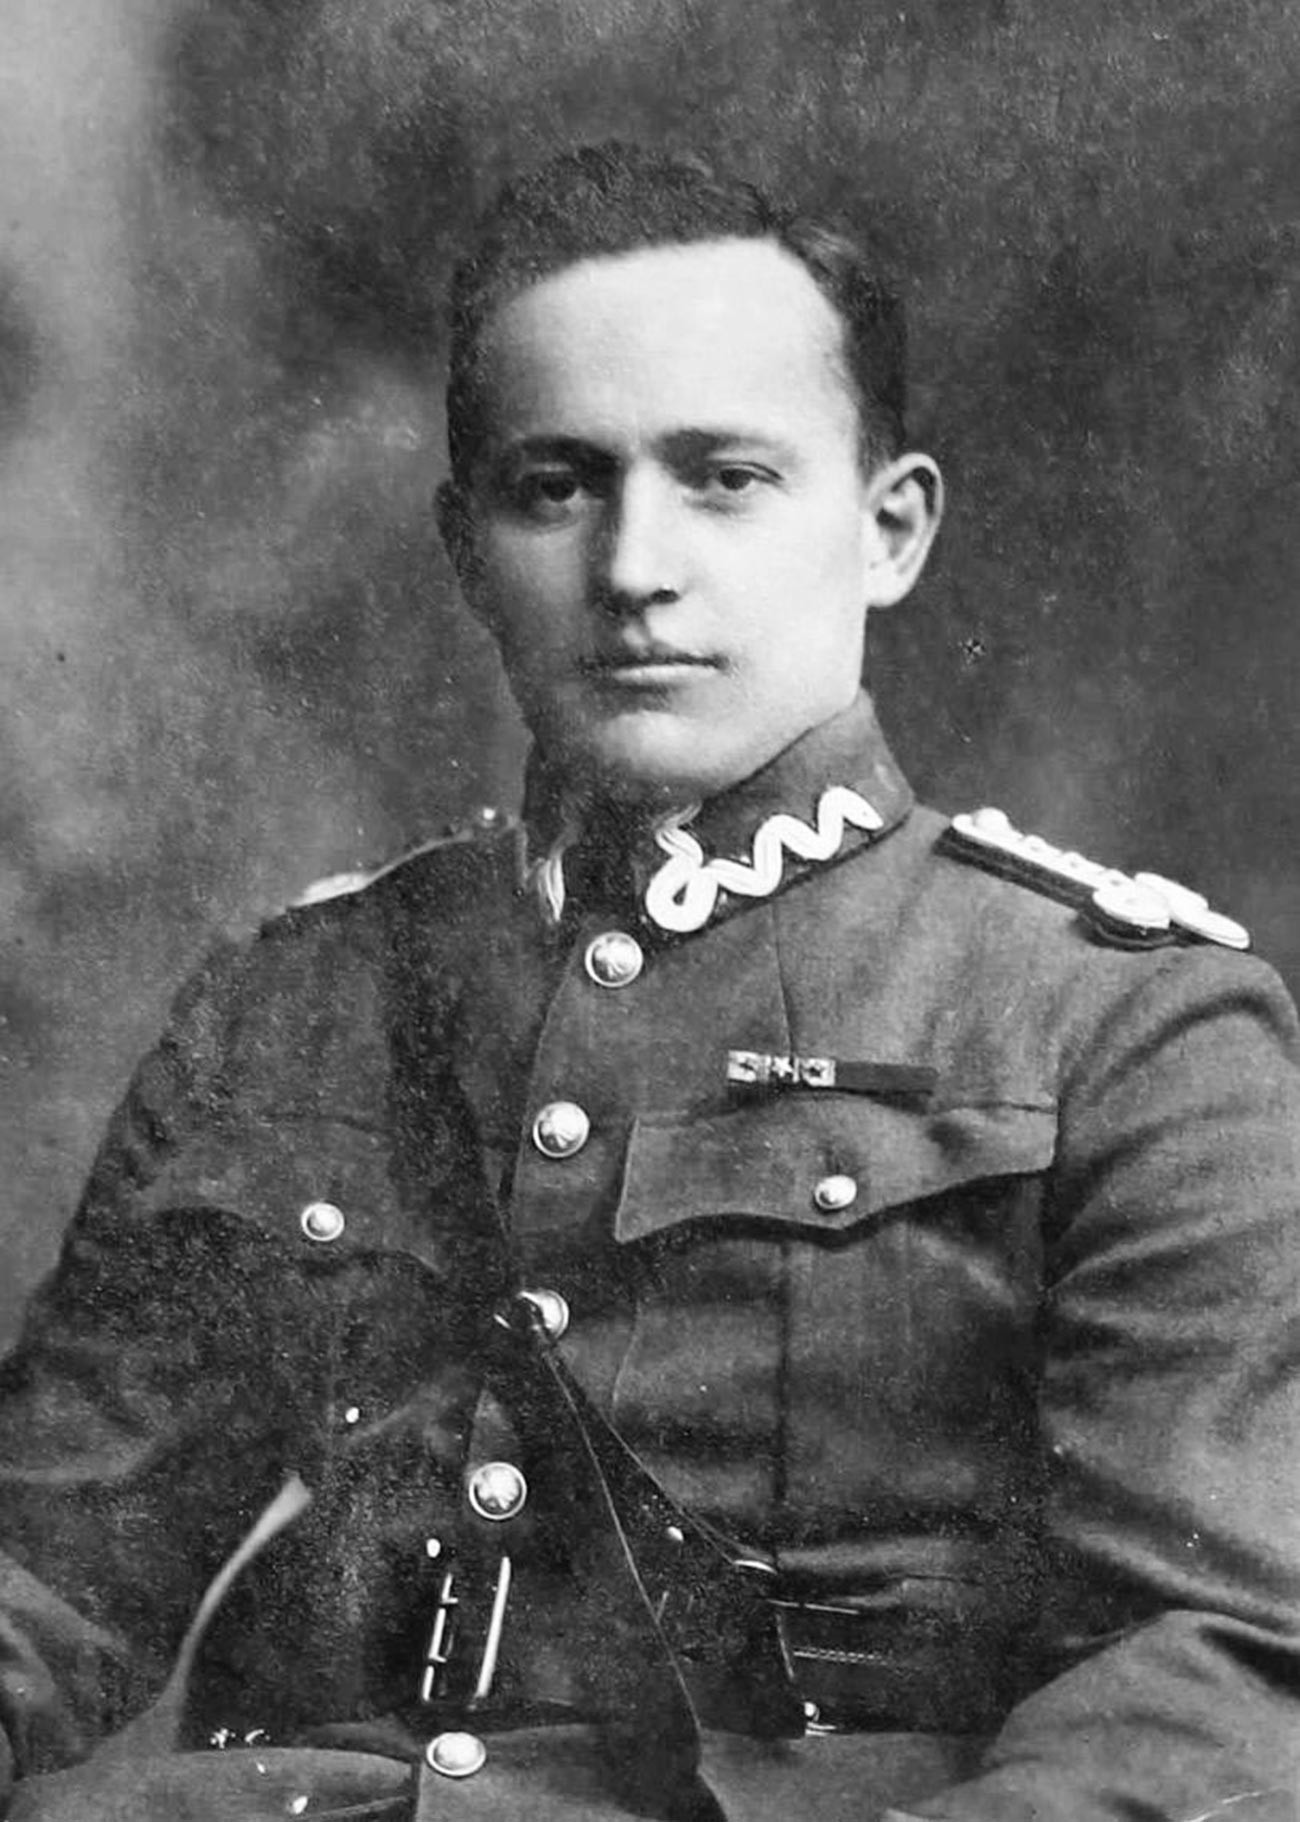 Cooper in Lwów during the time of the Kościuszko squadron.